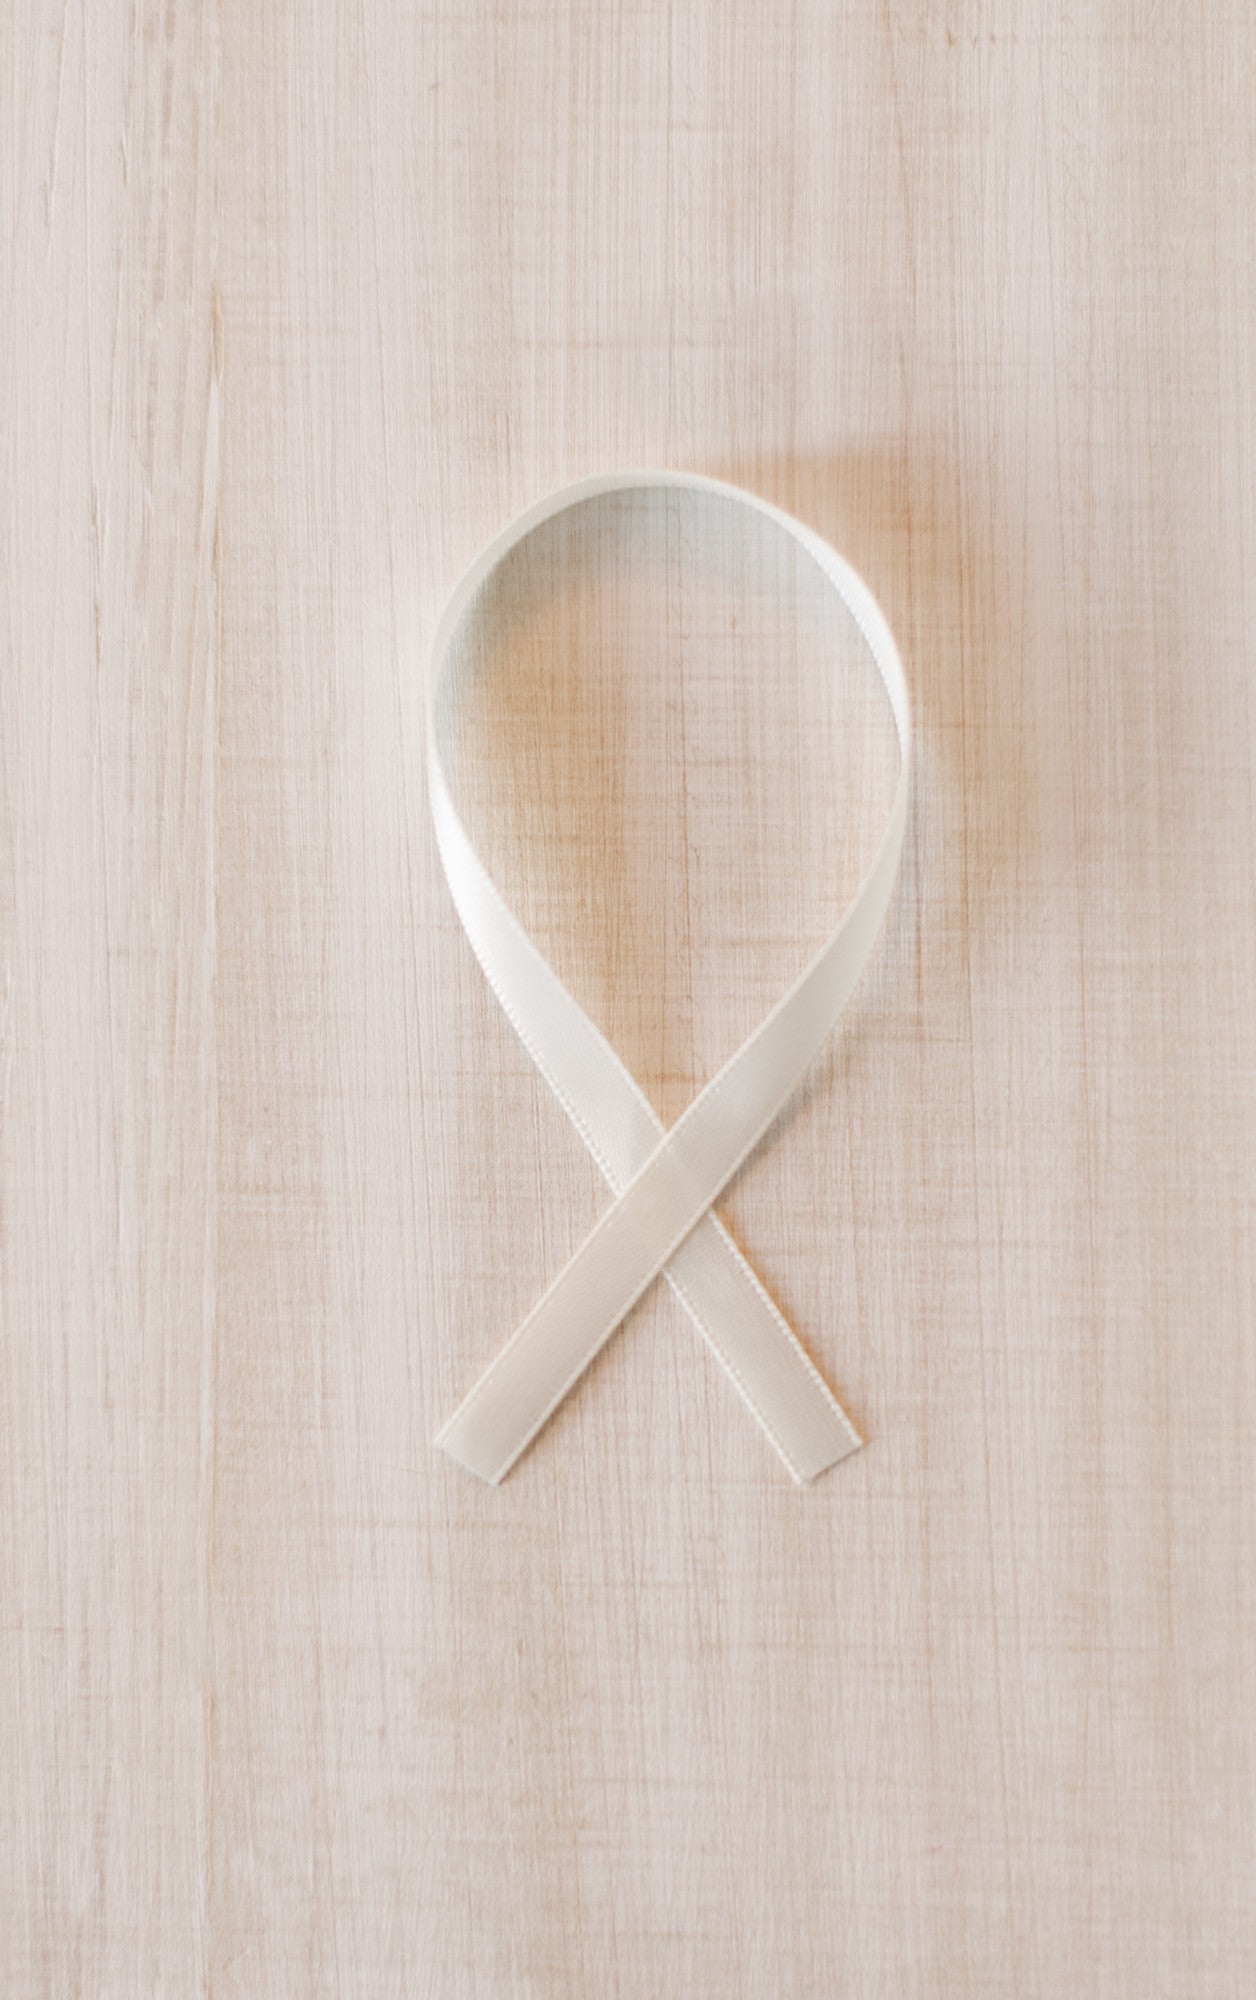 Esophageal Cancer Awareness Ornament